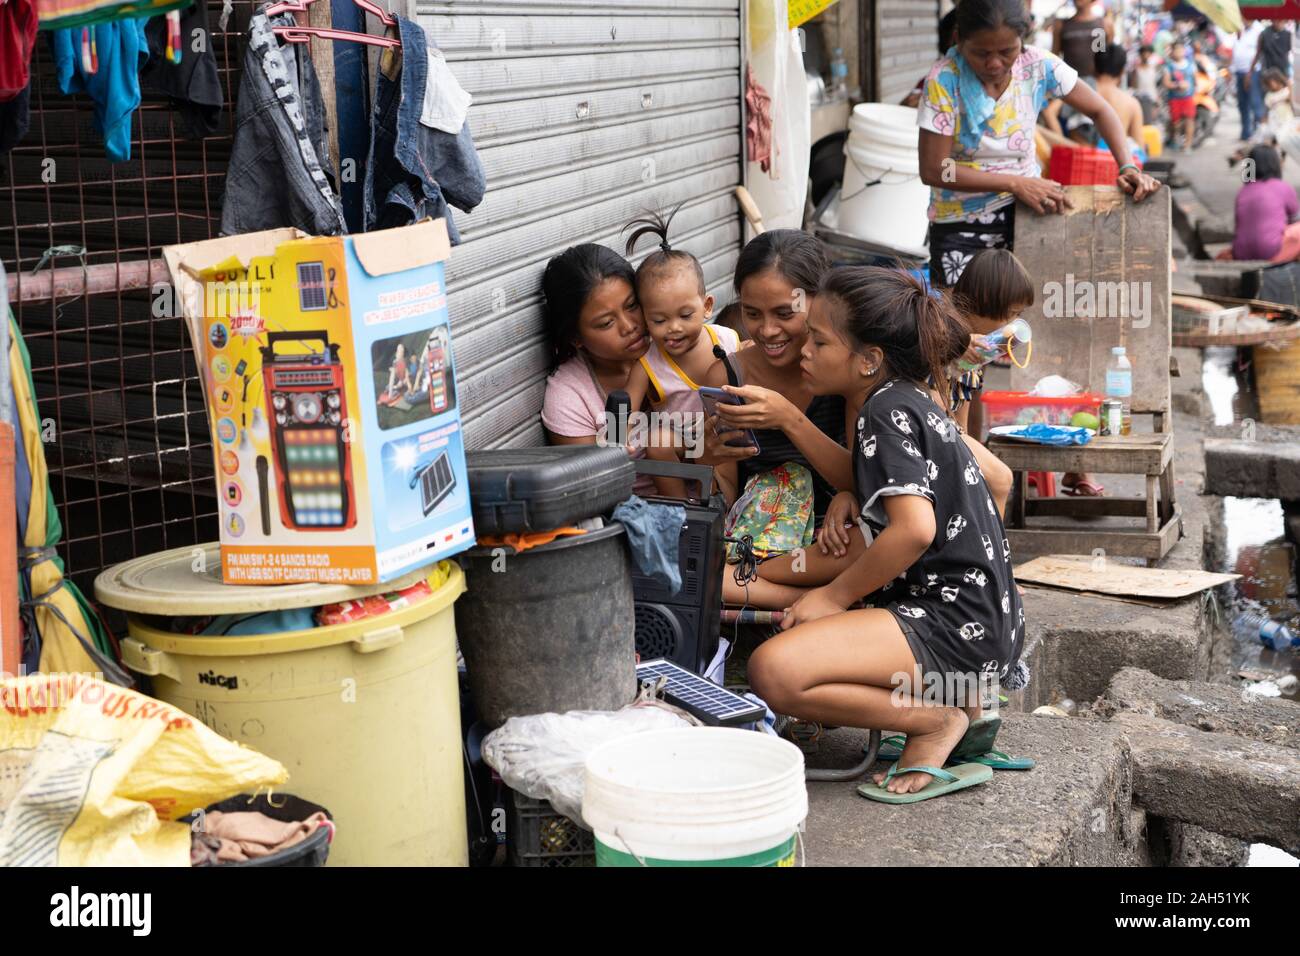 Girls choosing songs on a mobile phone connected to a karaoke machine within a poor area of Cebu City,Philippines Stock Photo